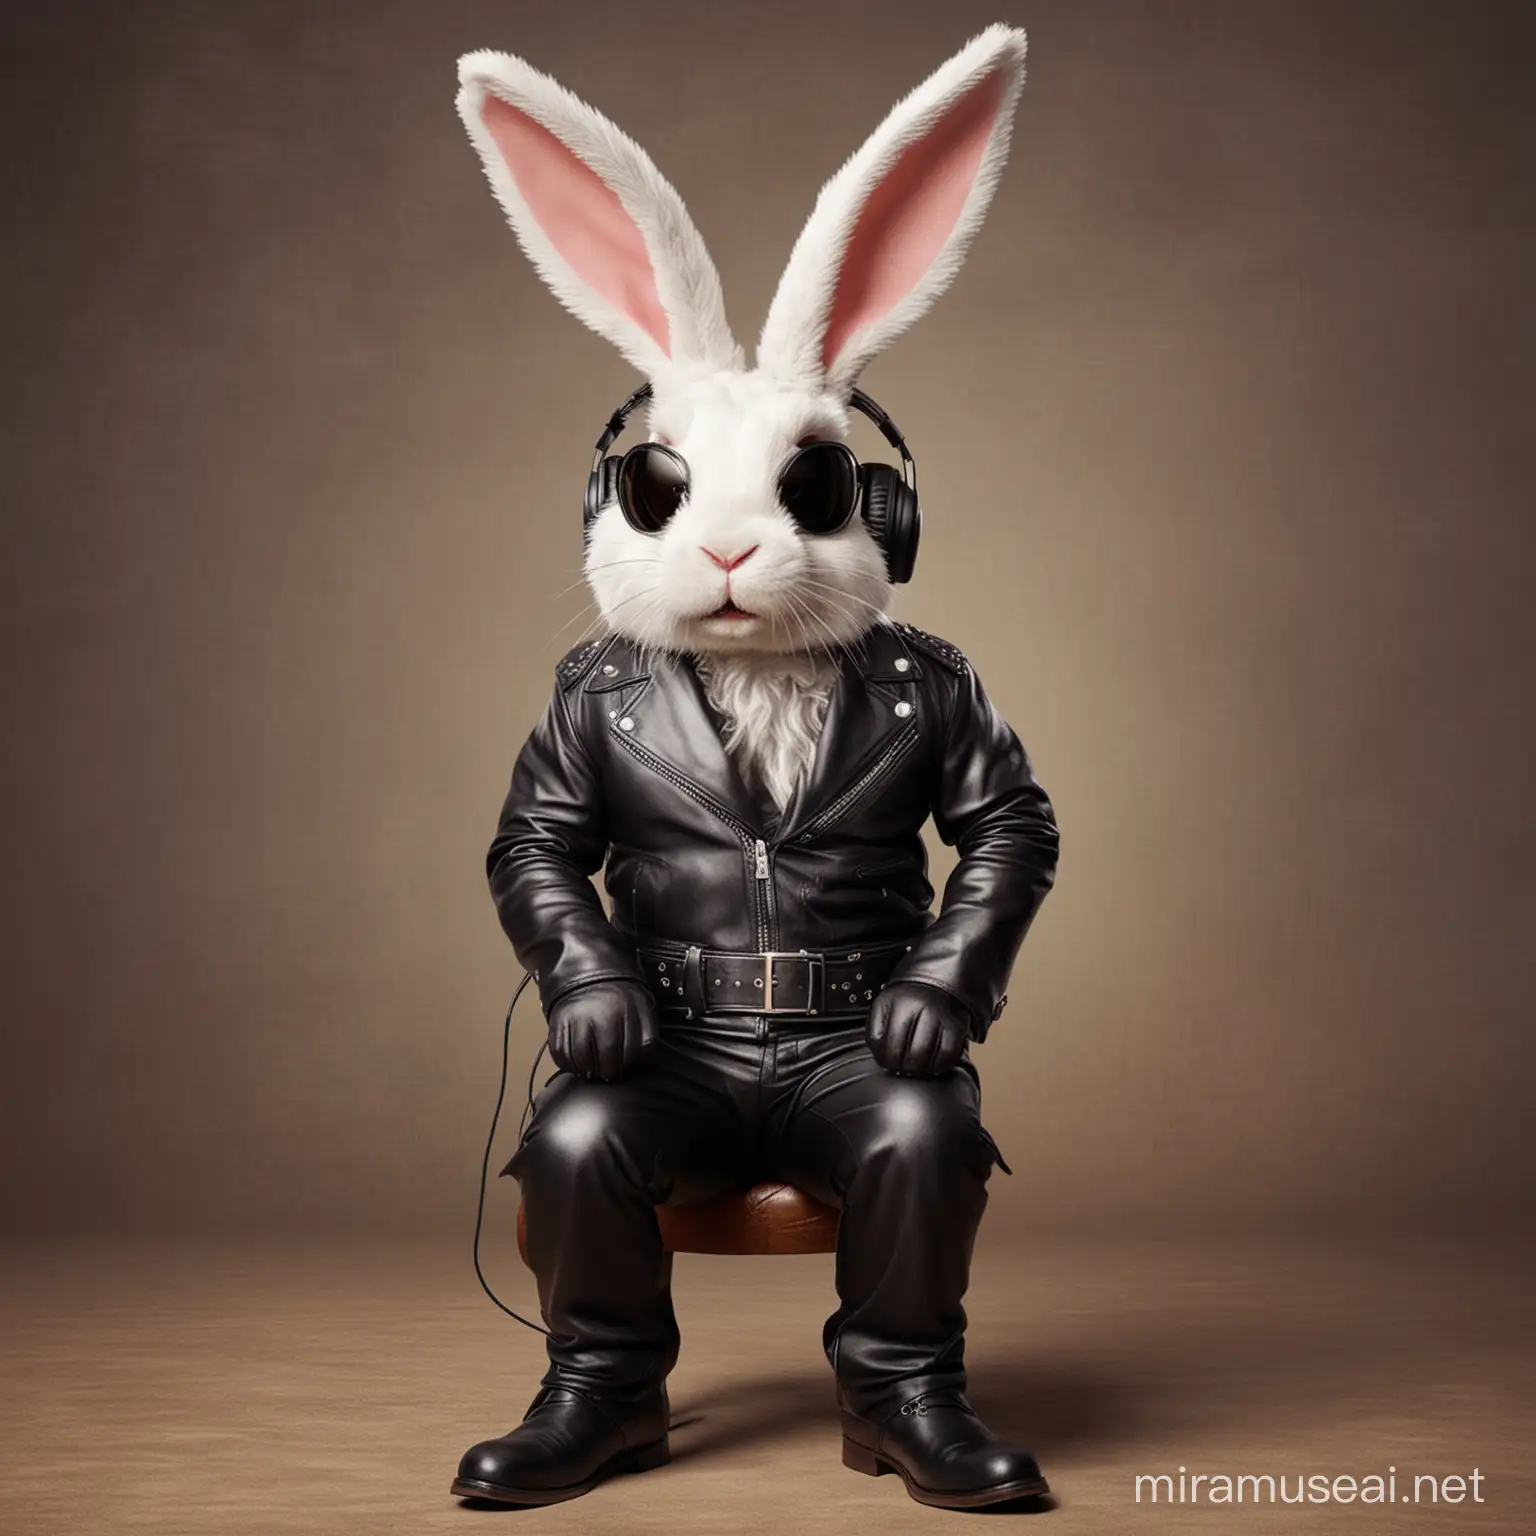 Easter Bunny dressed in leather listening to rock and roll